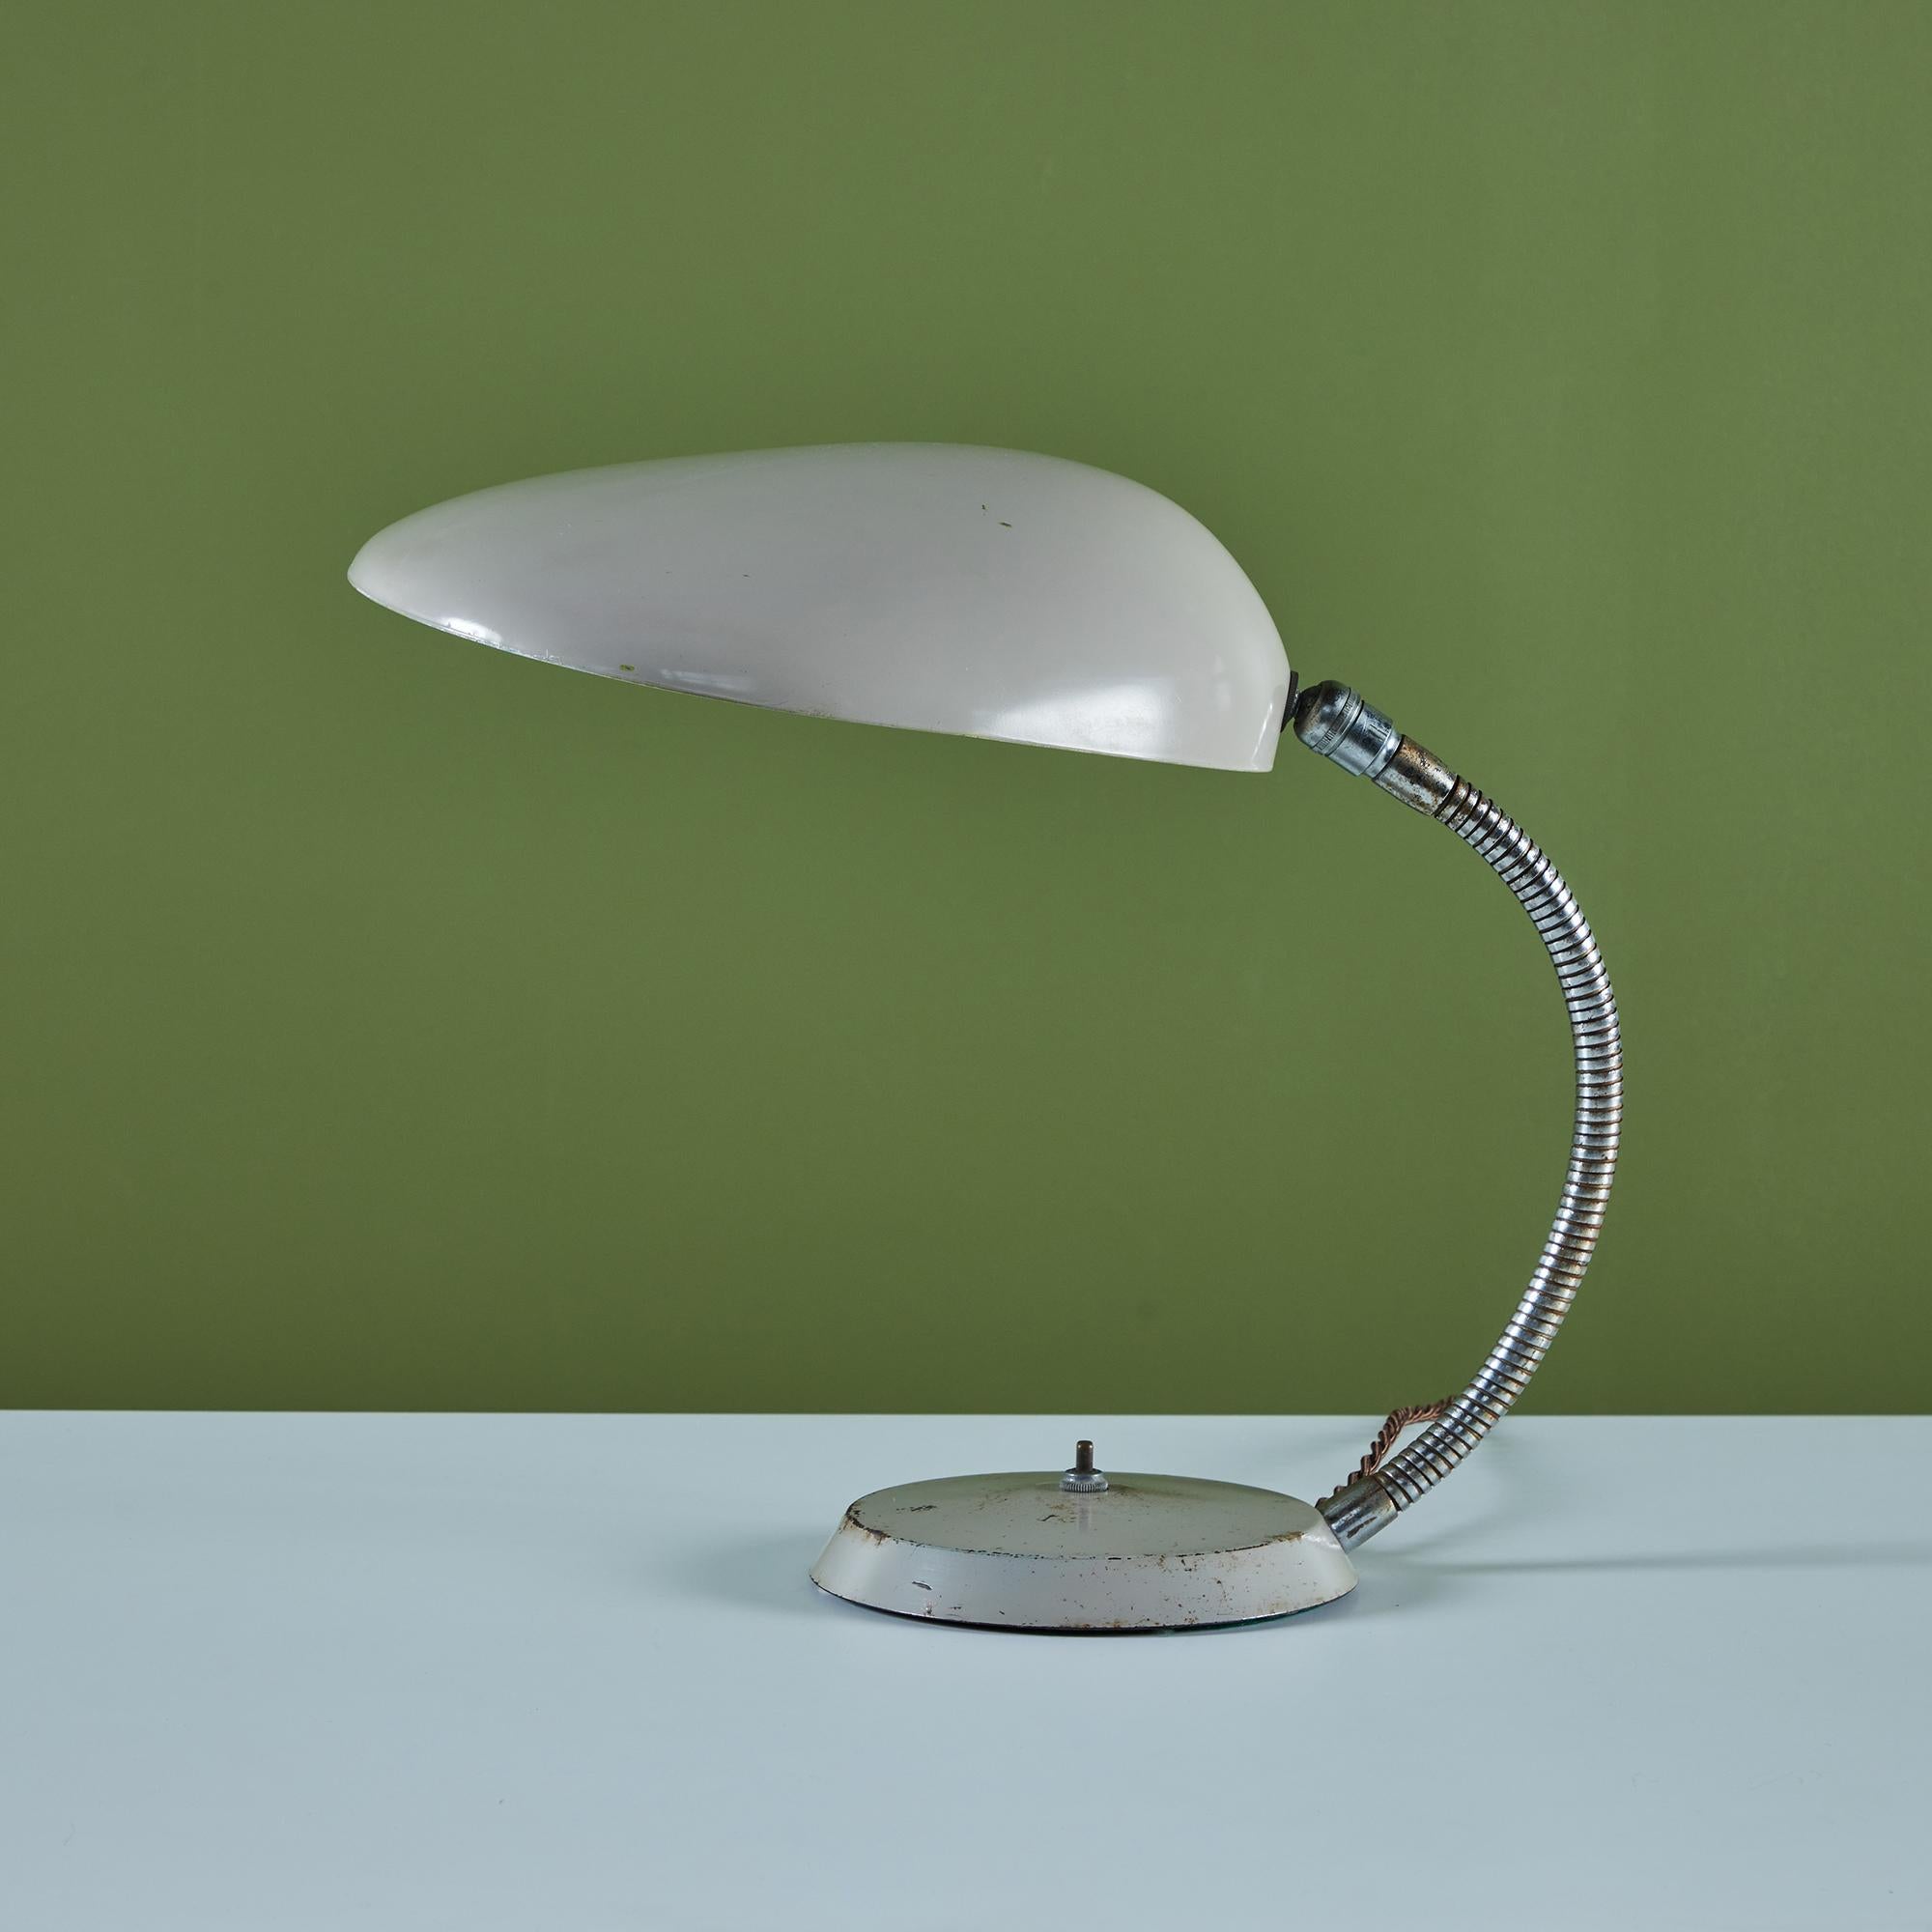 An award-winning 1948 design by Swedish-American Greta Grossman for Ralph O. Smith, a California-based lighting company. The lamp, colloquially known as the “Cobra” for its uniquely shaped cement colored enamel shade that resembles a cobra’s hood,